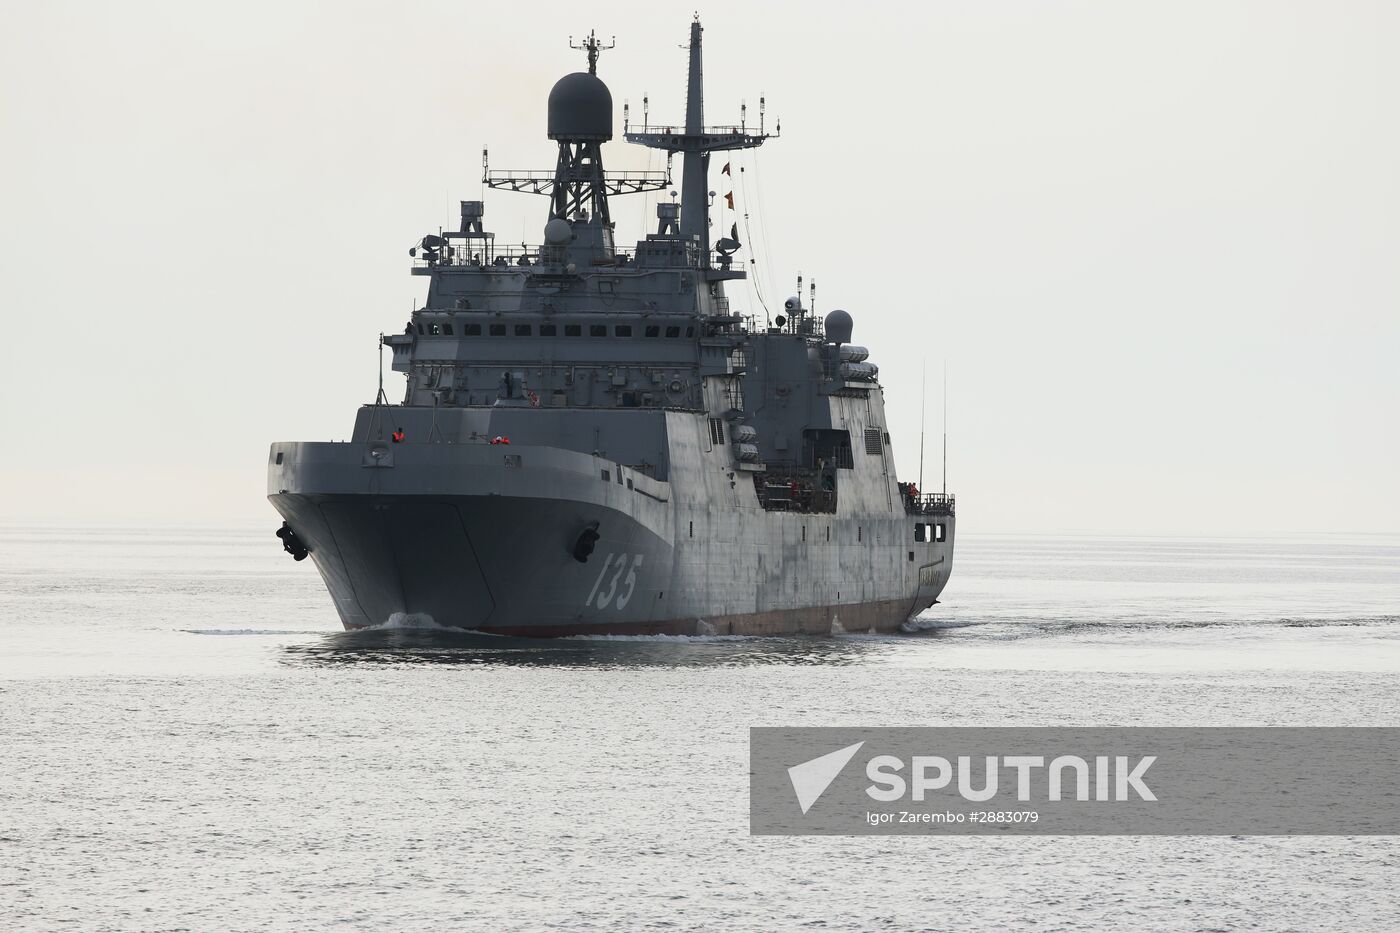 Ivan Gren landing ship is out to sea for testing